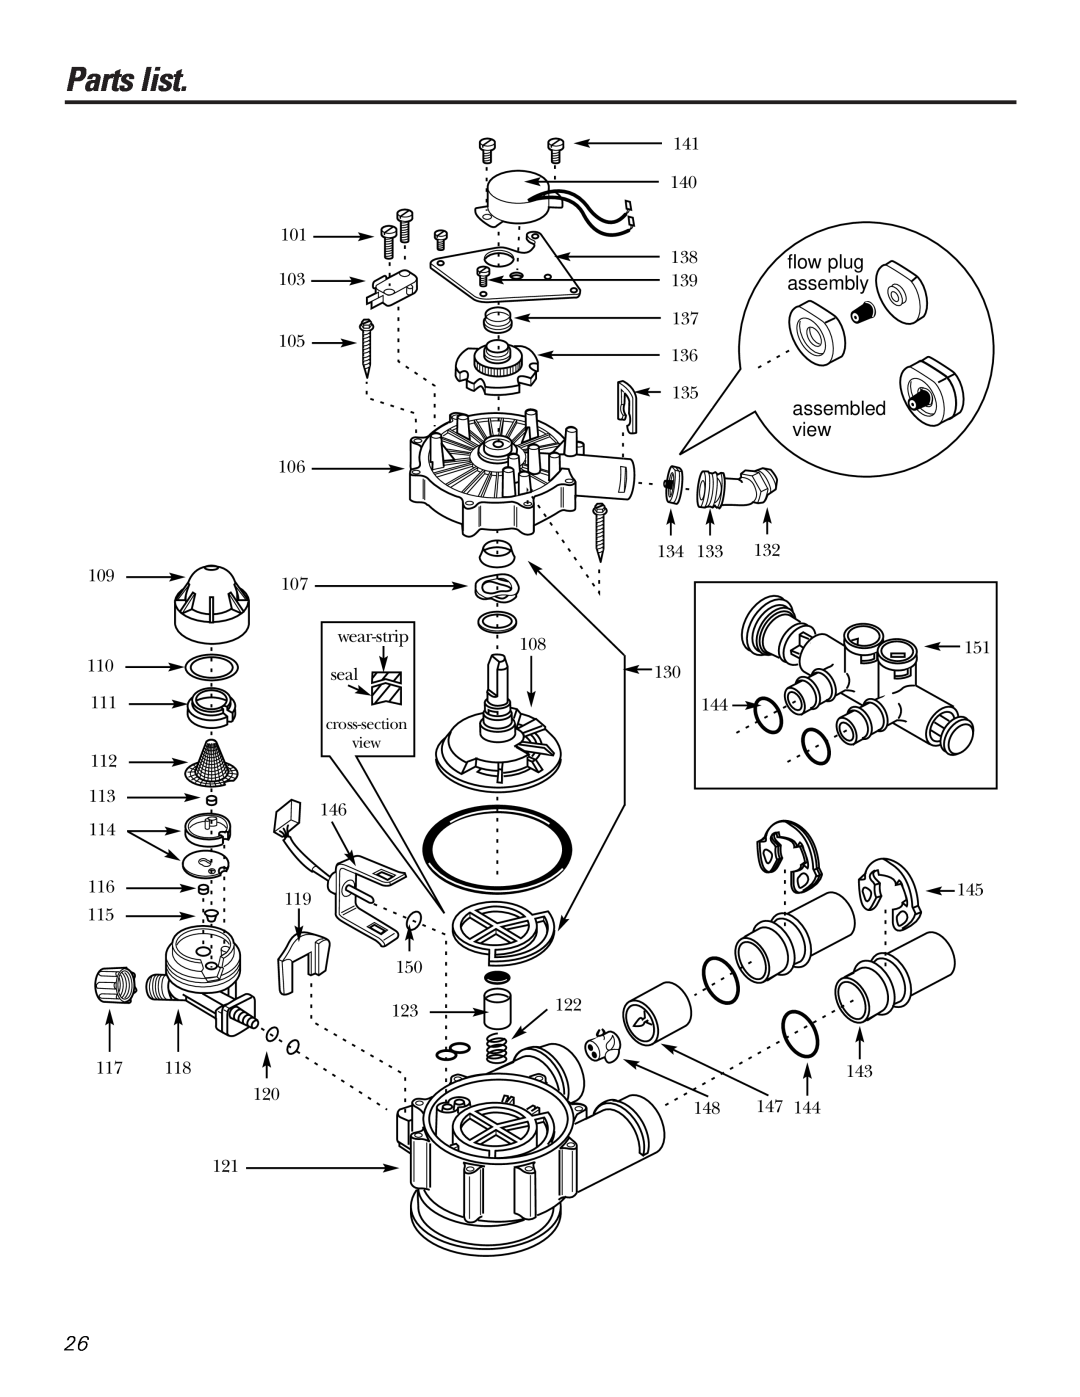 GE GNSF39A01, GNSF48A01 installation instructions Parts list, flow plug, assembled view, assembly 